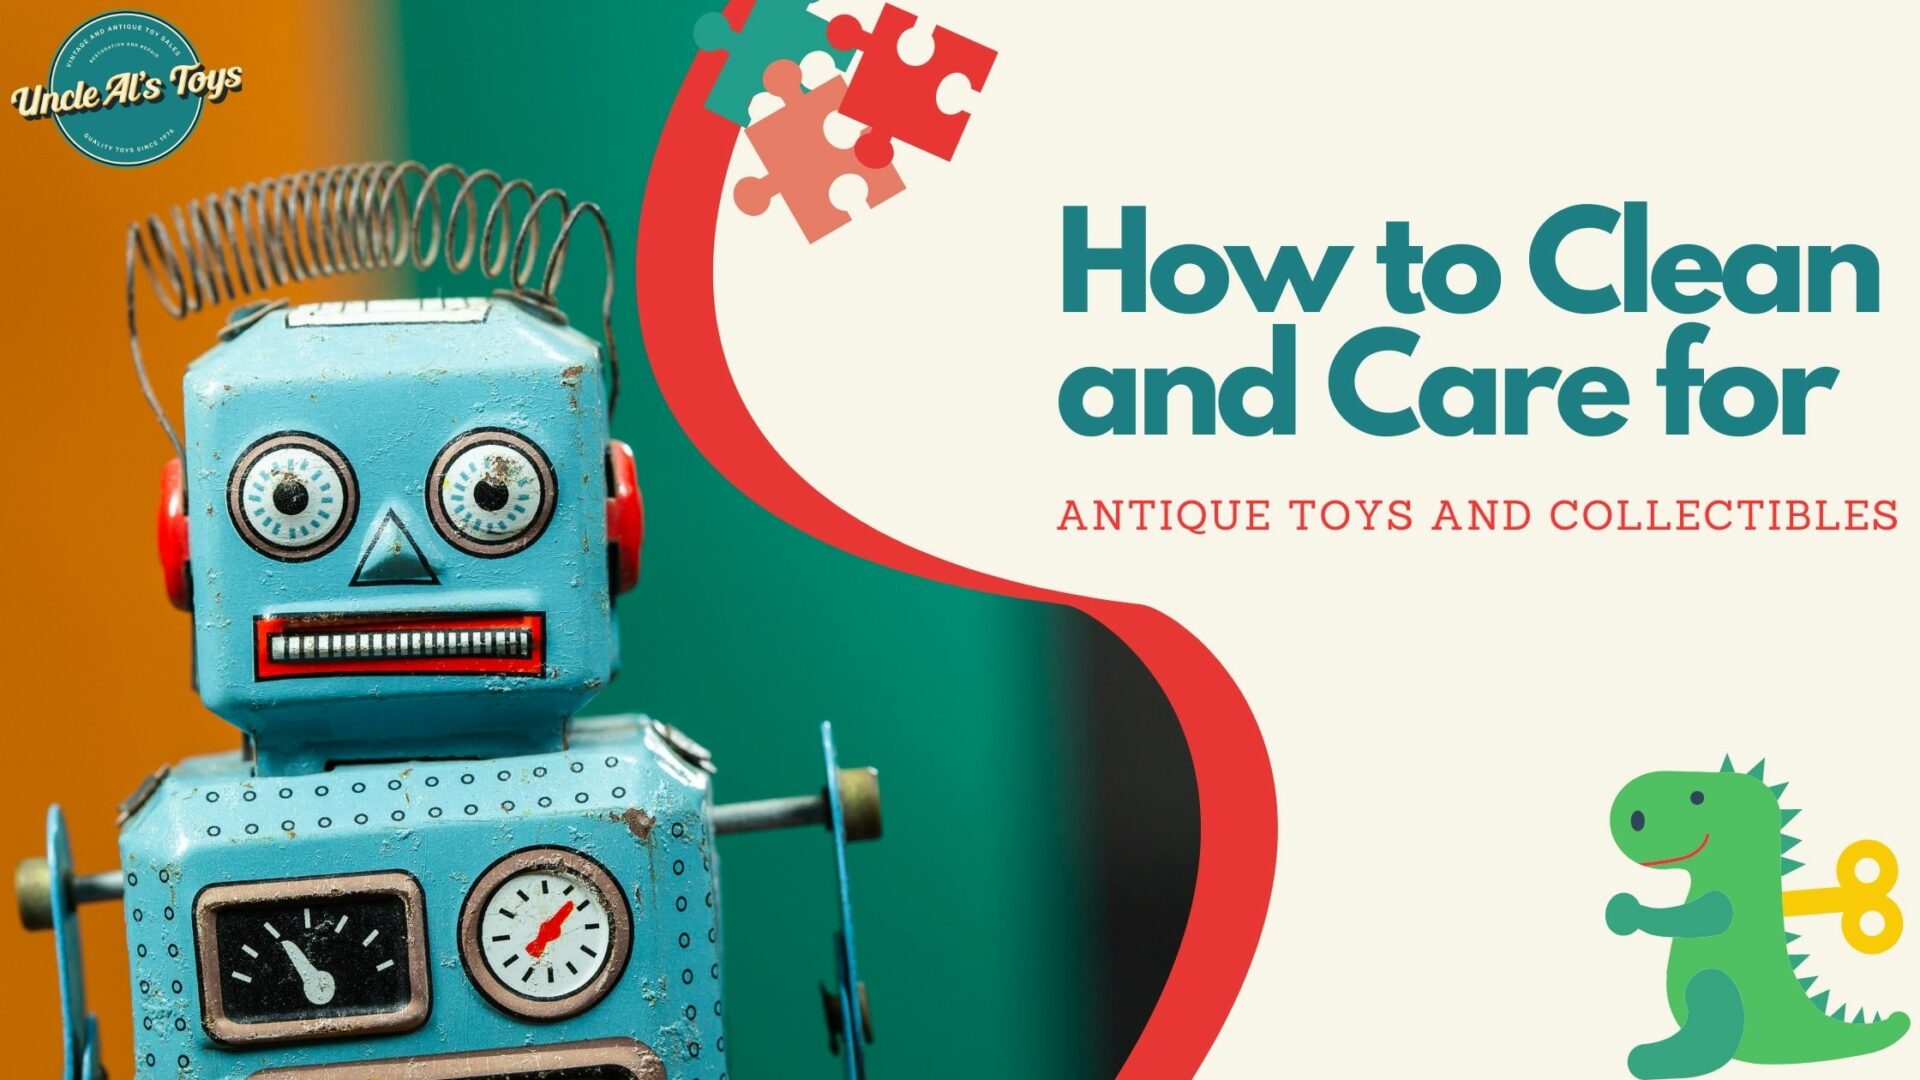 How to Clean and Care for Antique Toys and Collectibles